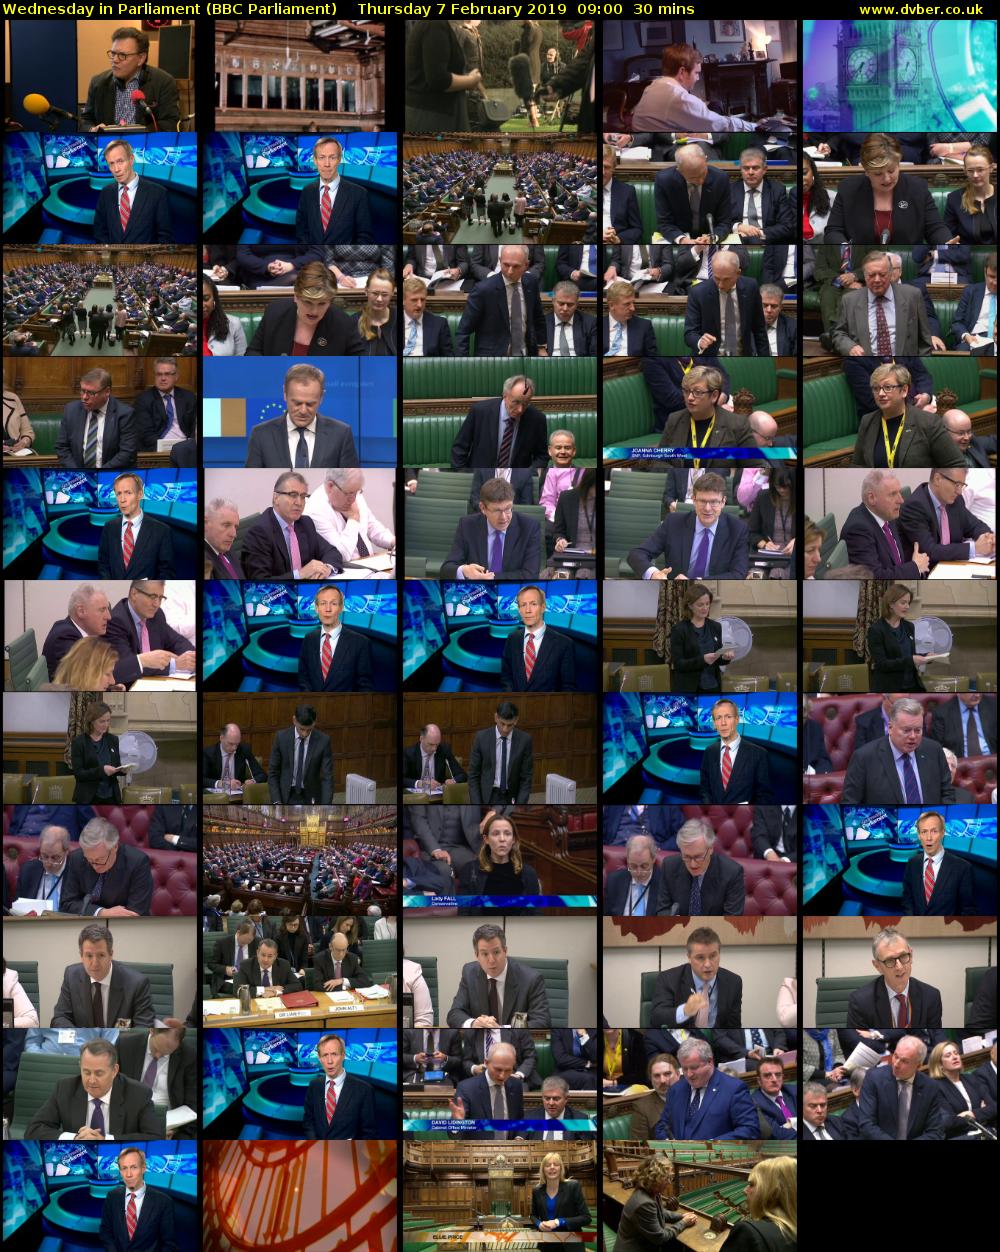 Wednesday in Parliament (BBC Parliament) Thursday 7 February 2019 09:00 - 09:30